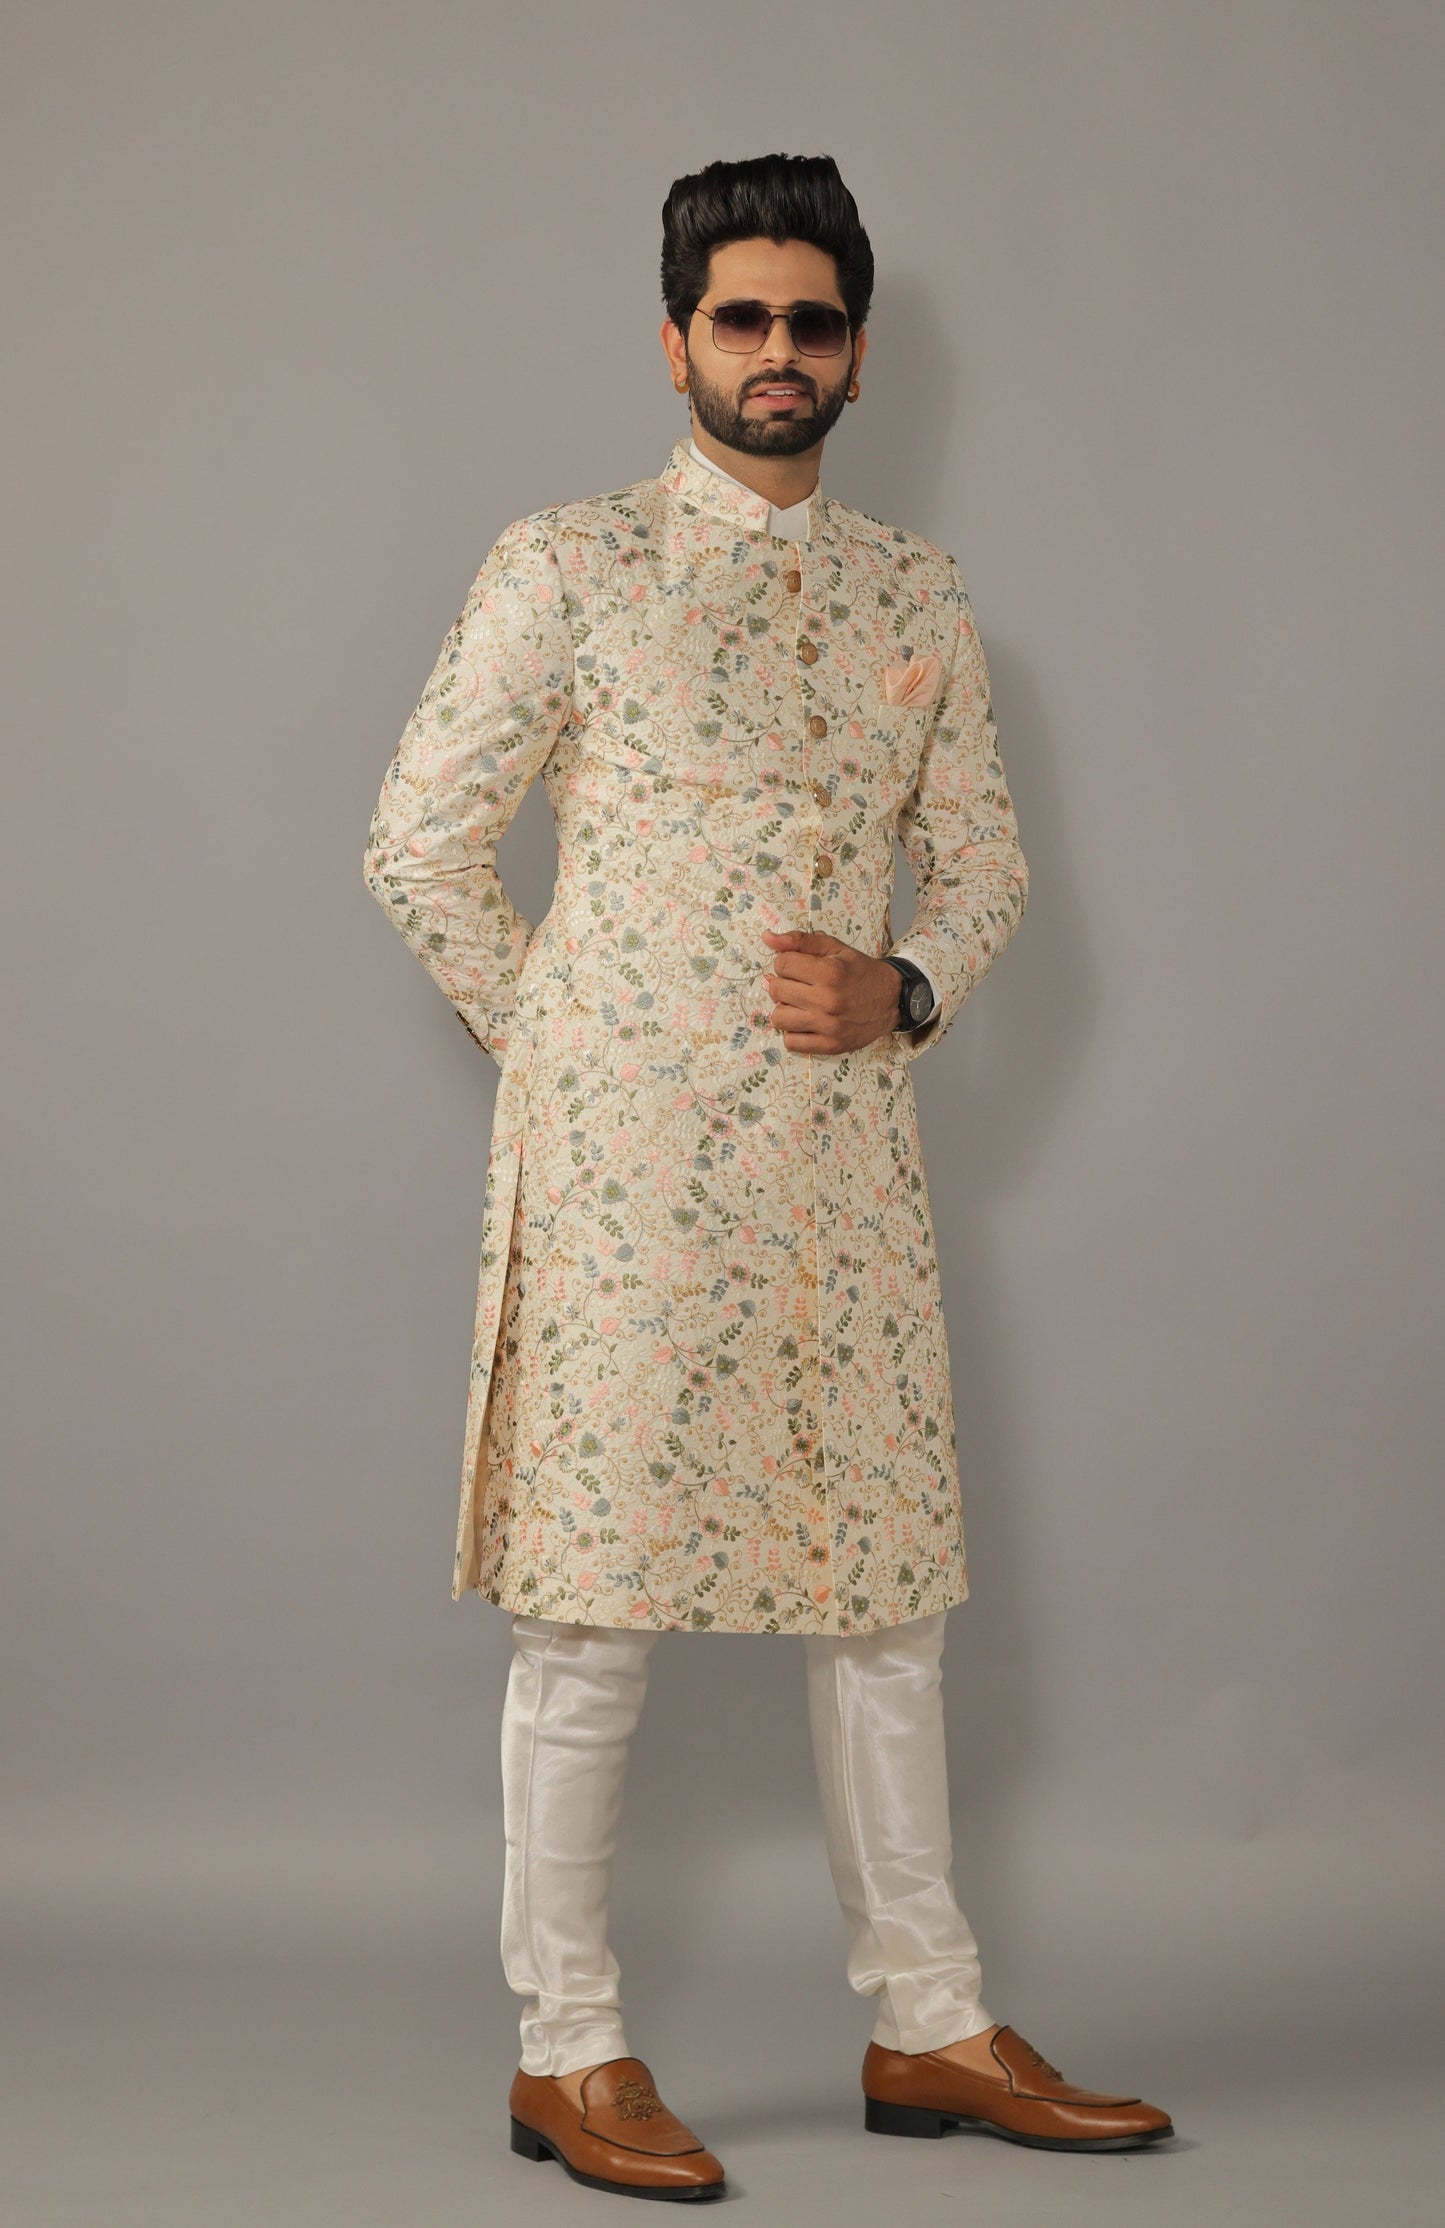 Lucknowi Chikankari Embroidered Pastel Color Sherwani Achkan with Floral Details